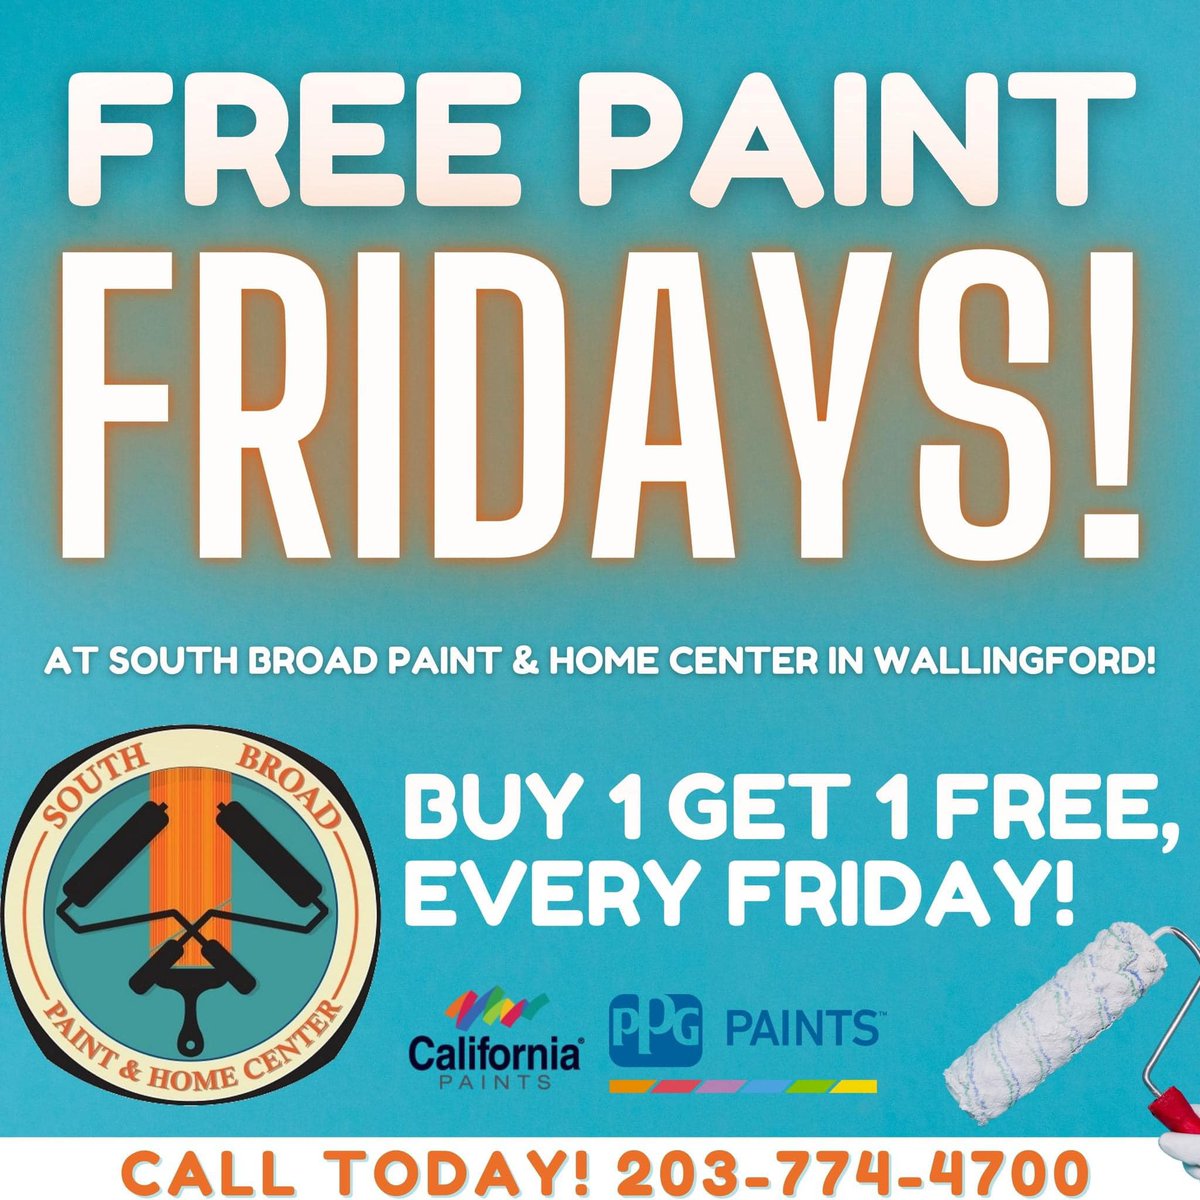 Get creative this Friday with Free Paint! Buy one gallon of PPG Paints or California Paints and receive a second gallon FREE! *See store for details* 📍1267 South Broad Street in Wallingford #southbroadpaintcenter #freepaintfridays #southbroadpaint #wallingfordct